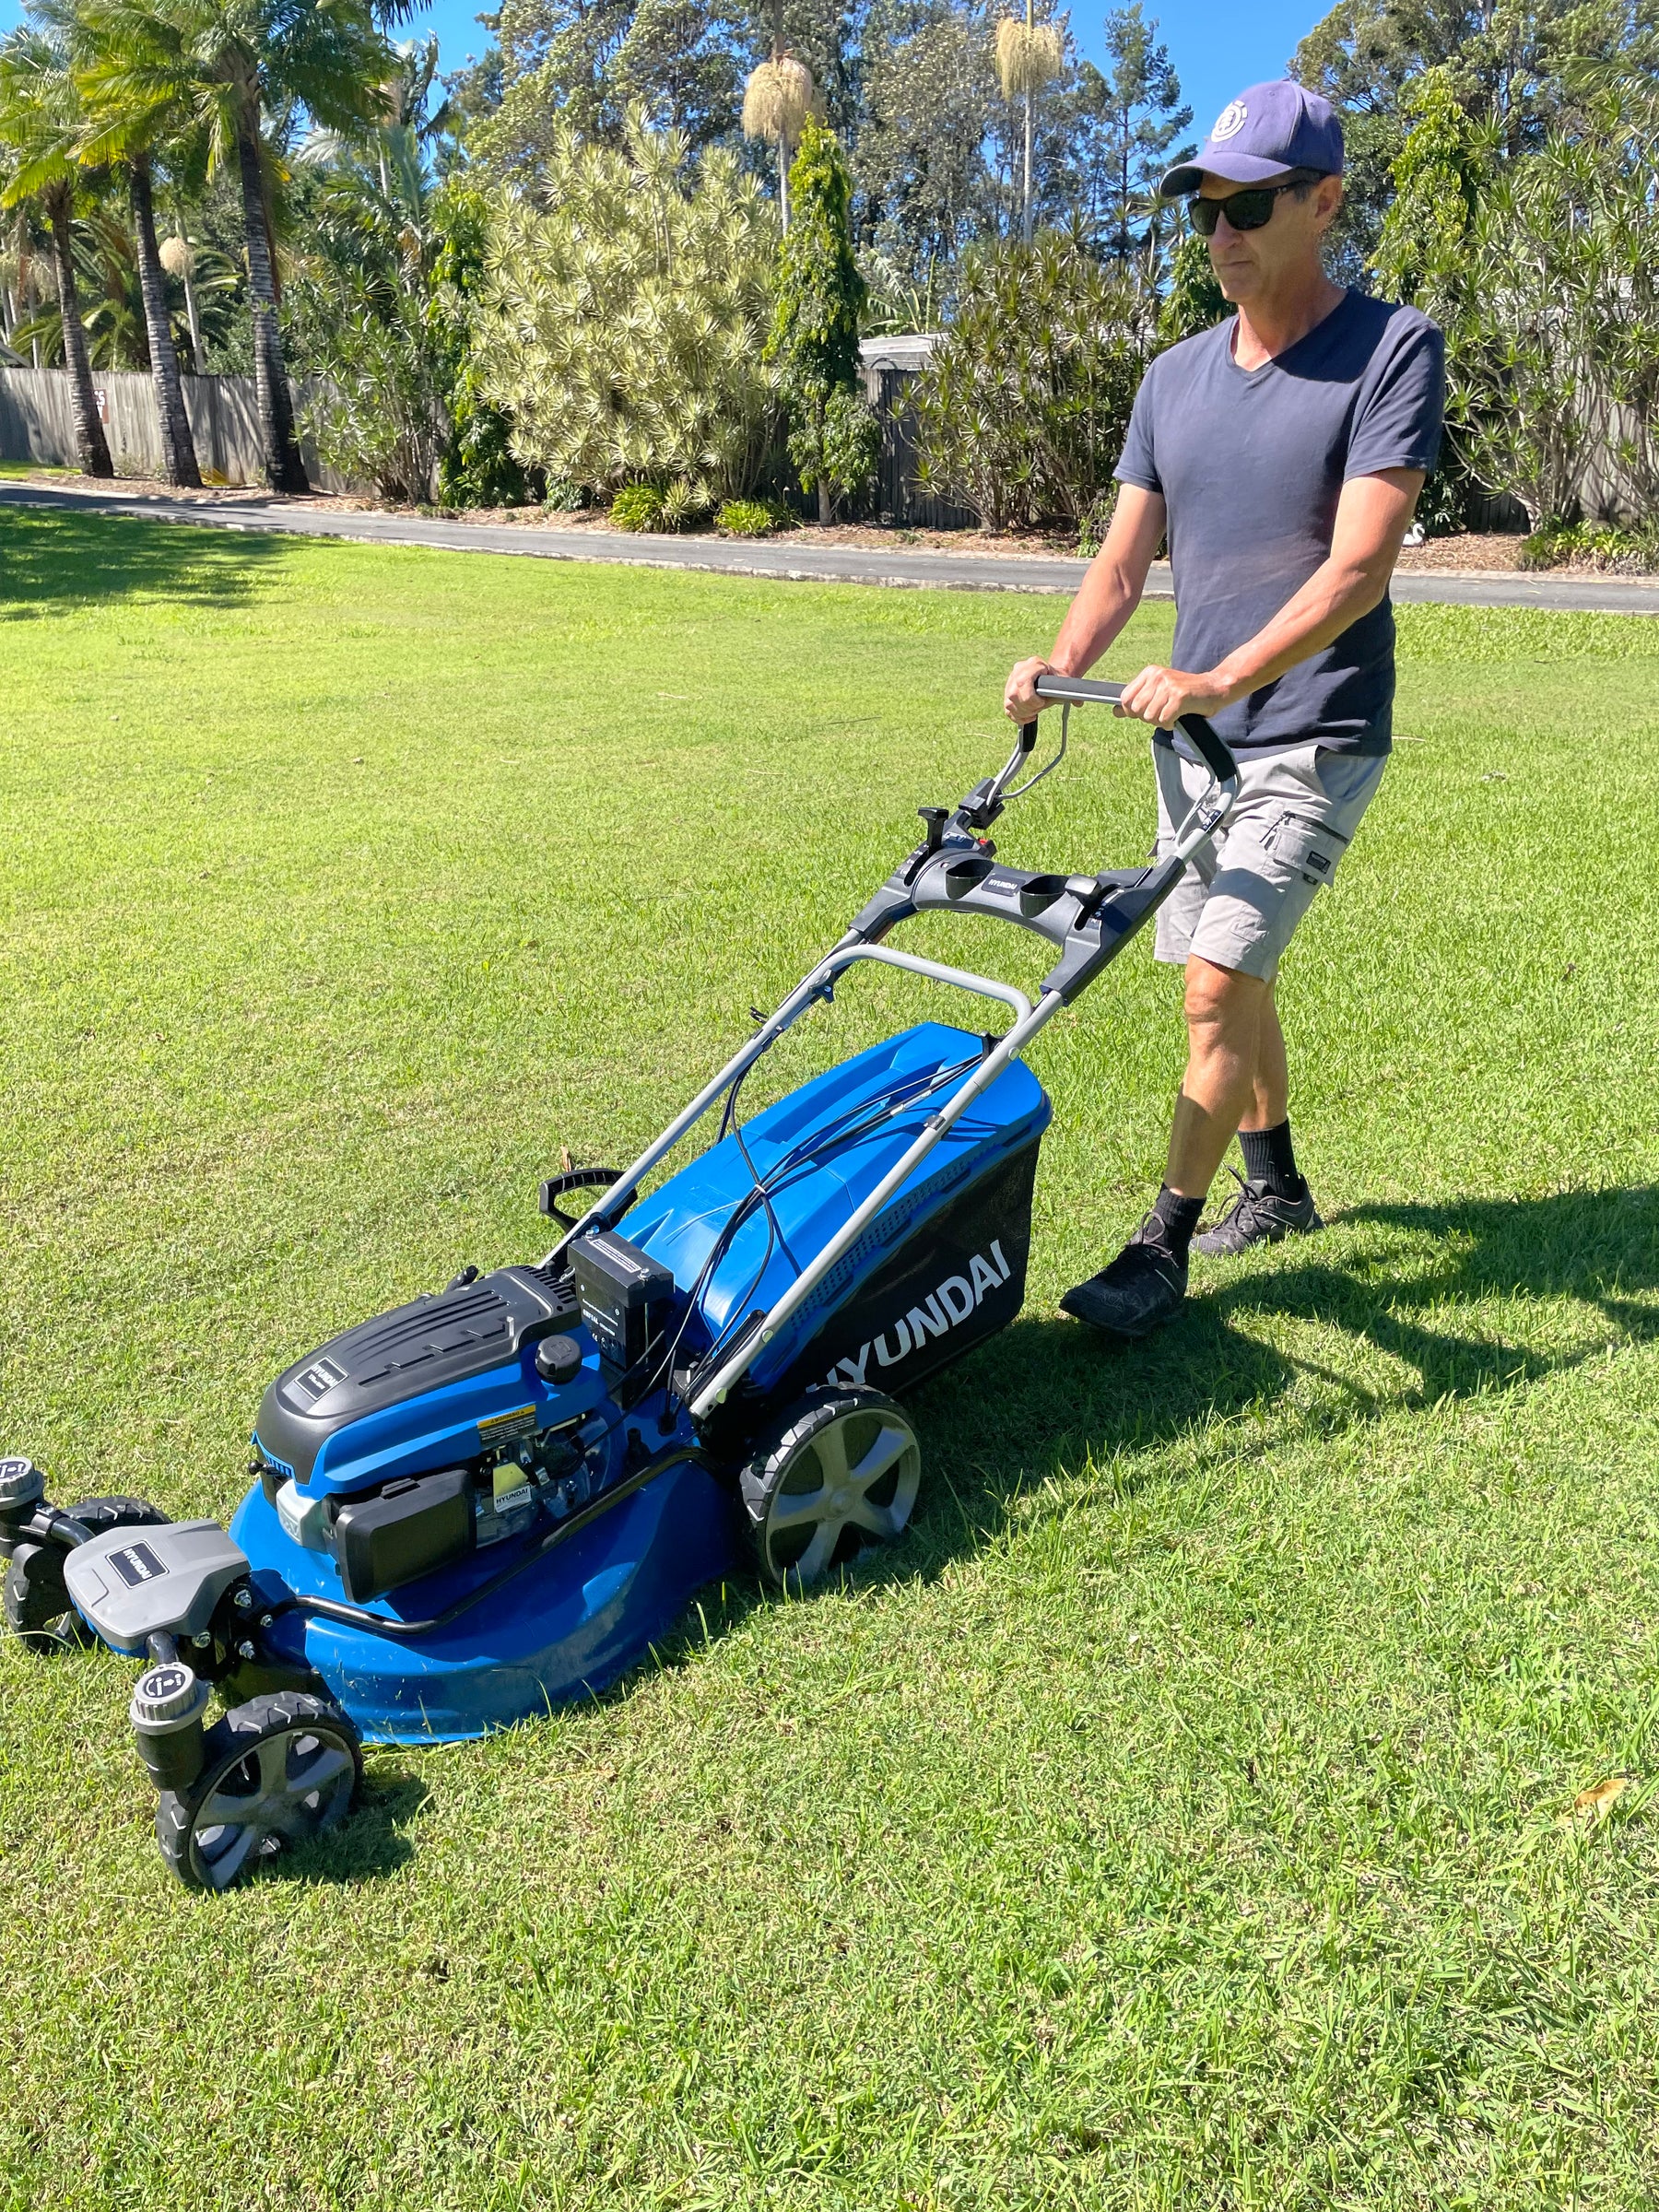 Revolutionize Your Lawn Care Routine with the Hyundai 20" Petrol Zero Turn Lawn Mower: Electric Start, Self-Propelled, and Durable Steel Deck